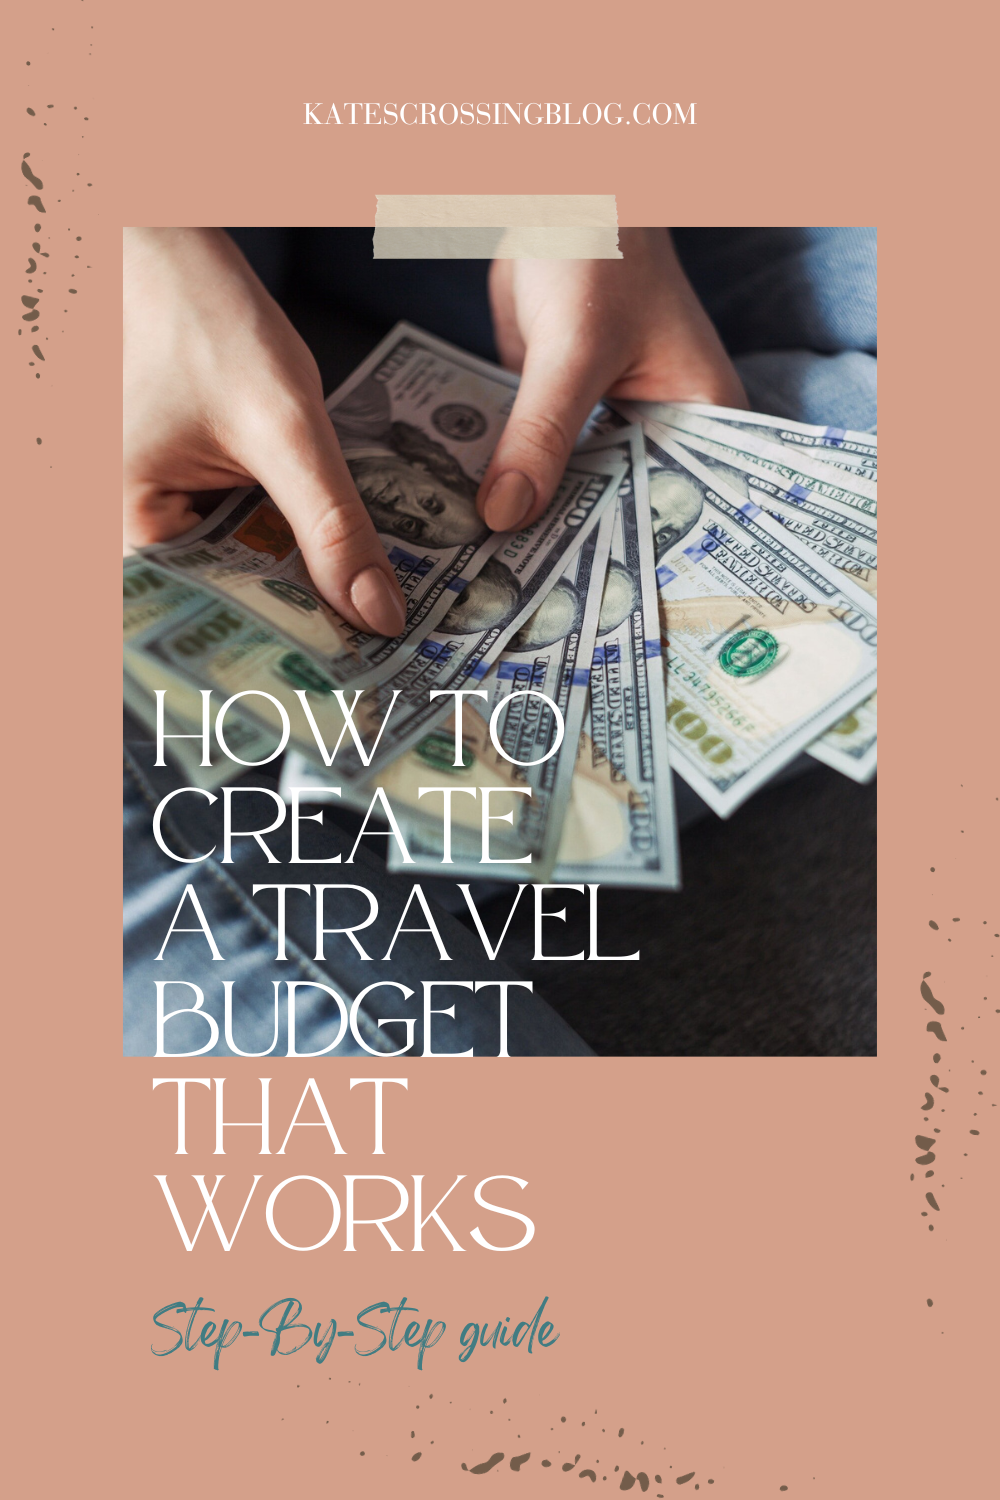 How to create a travel budget